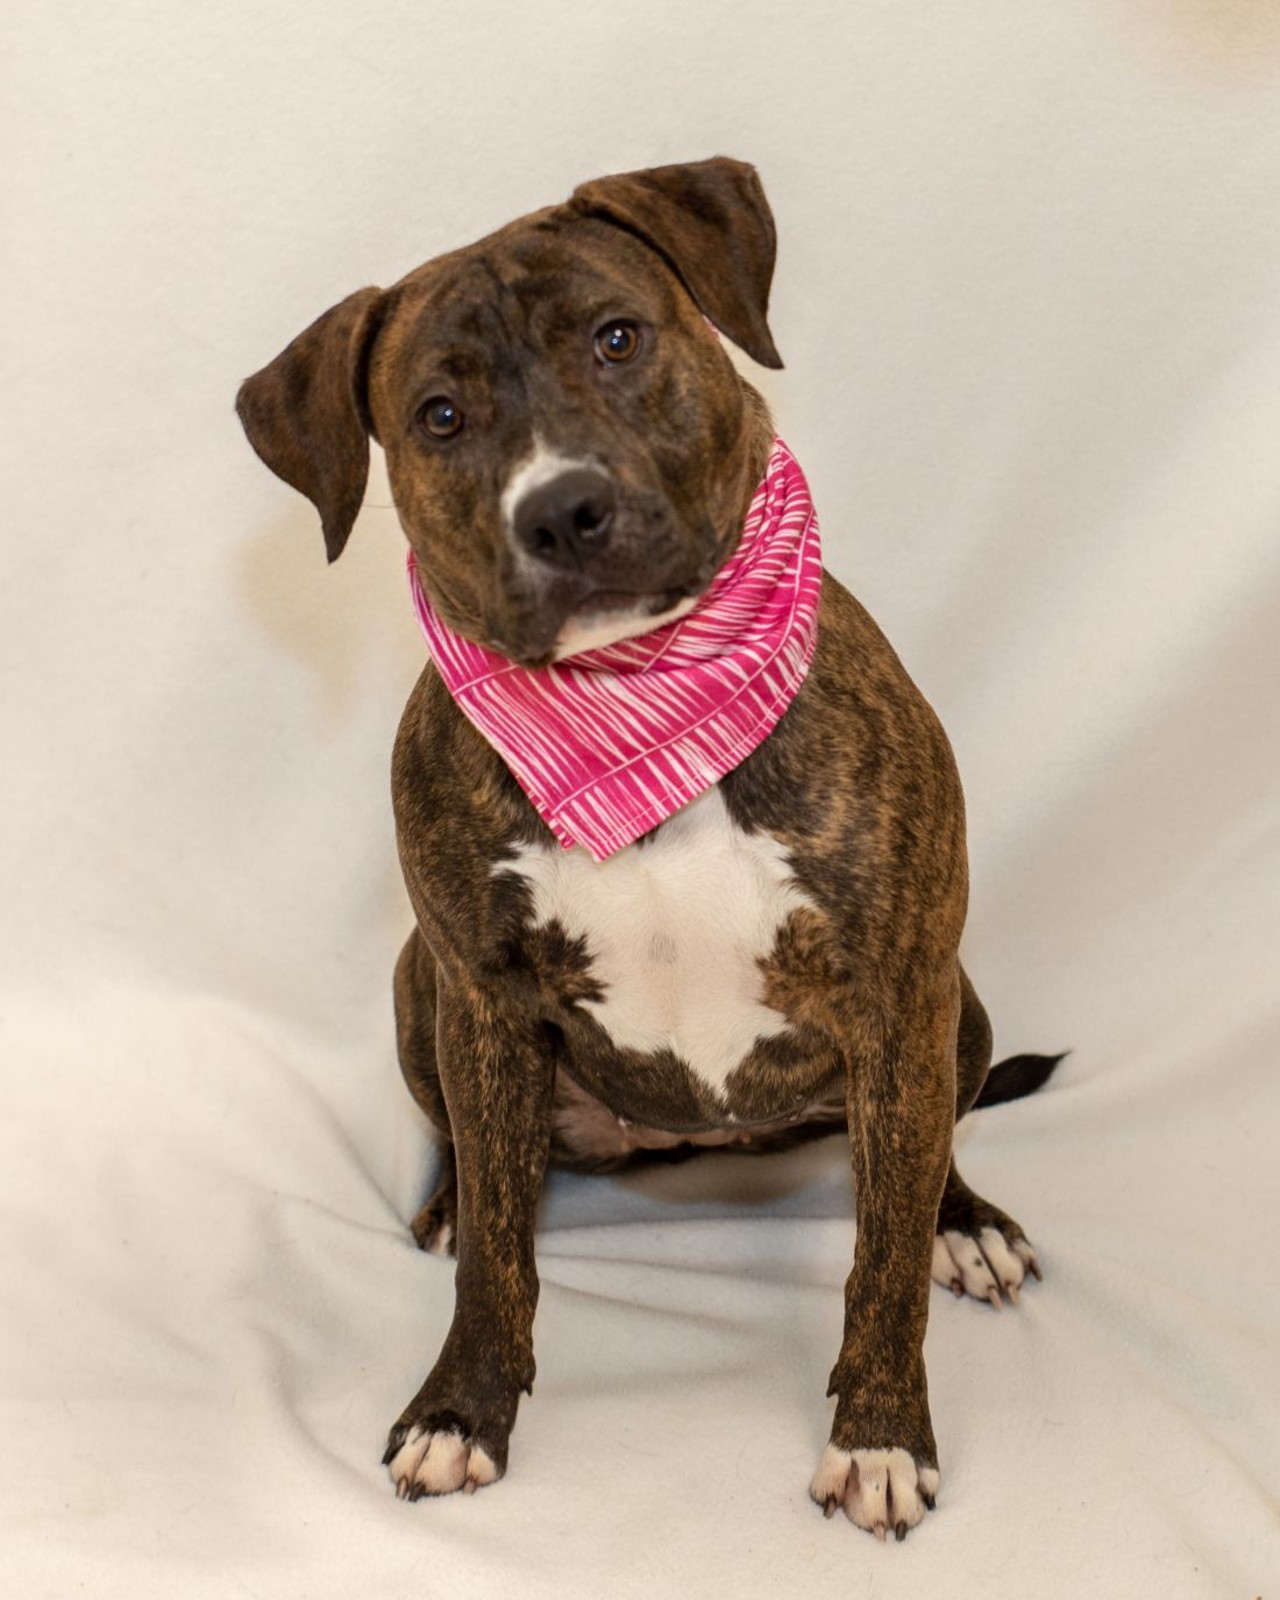 NAME: Madison 
GENDER: Female 
BREED: Pit Bull 
AGE: 1 year, 7 months 
WEIGHT: 51 pounds
SPECIAL CONSIDERATIONS: Madison prefers a home with older or no children.
REASON I CAME TO MHS: Agency transfer 
LOCATION: Berman Center for Animal Care in Detroit 
ID NUMBER: 869557 